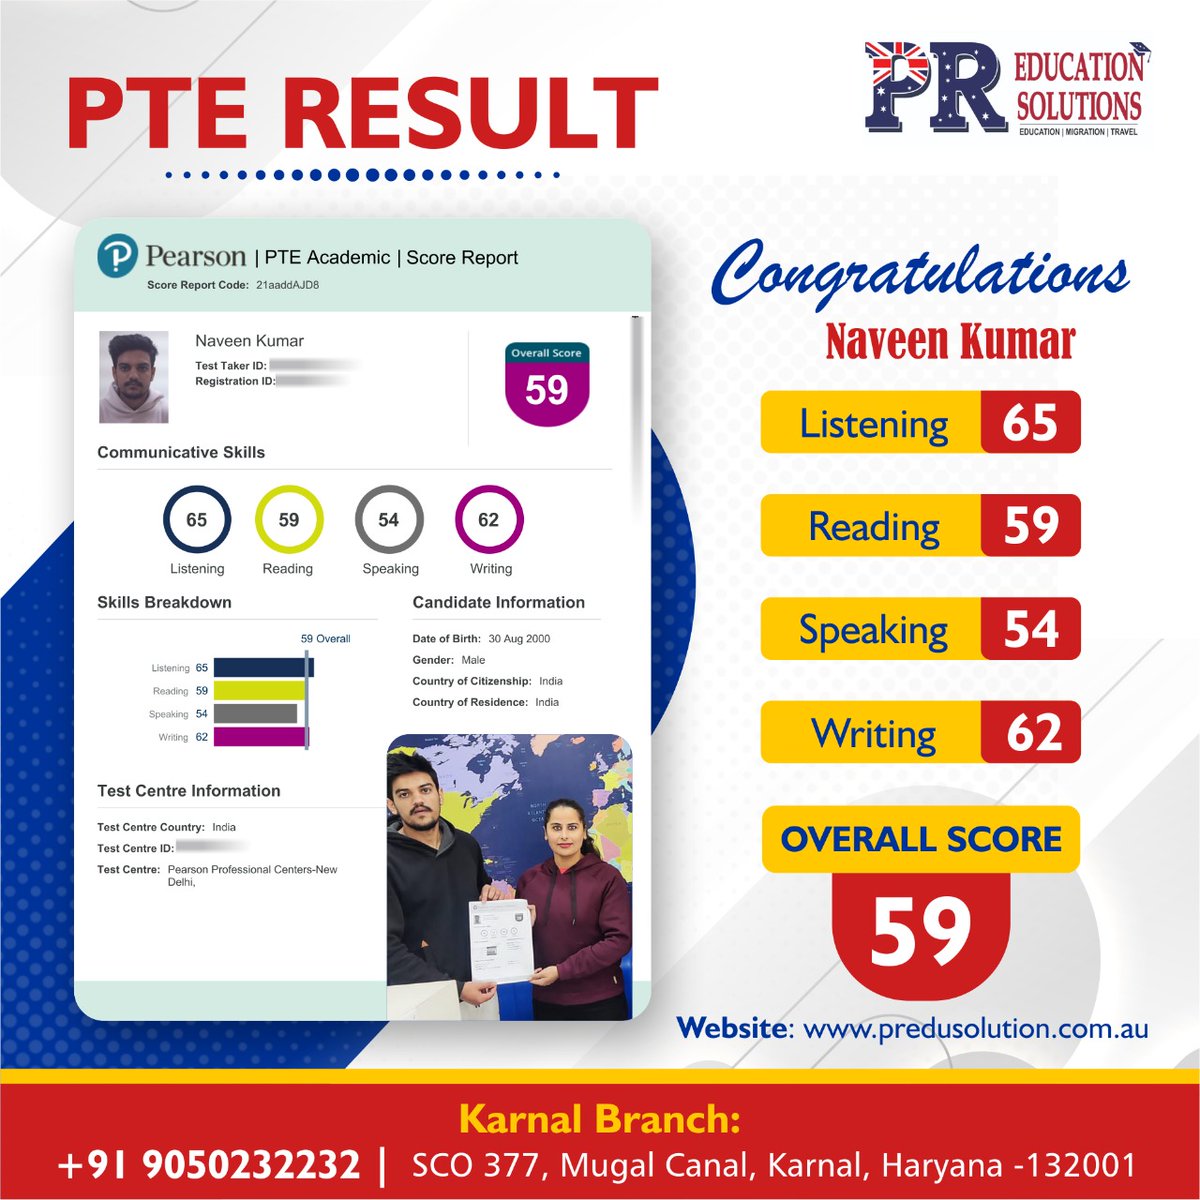 🎉🎉Congratulations 𝗠𝗿. Naveen for achieving overall 59 Band Score in the first attempt. 🎉🎉

#predusolution #PTEprep #pteexampreparation #ptecoaching  #ptewriting #bestpteinstitute #TopPerformer #karnal #karnalcity #admissions #admissionsopen2023  #australiavisagrant